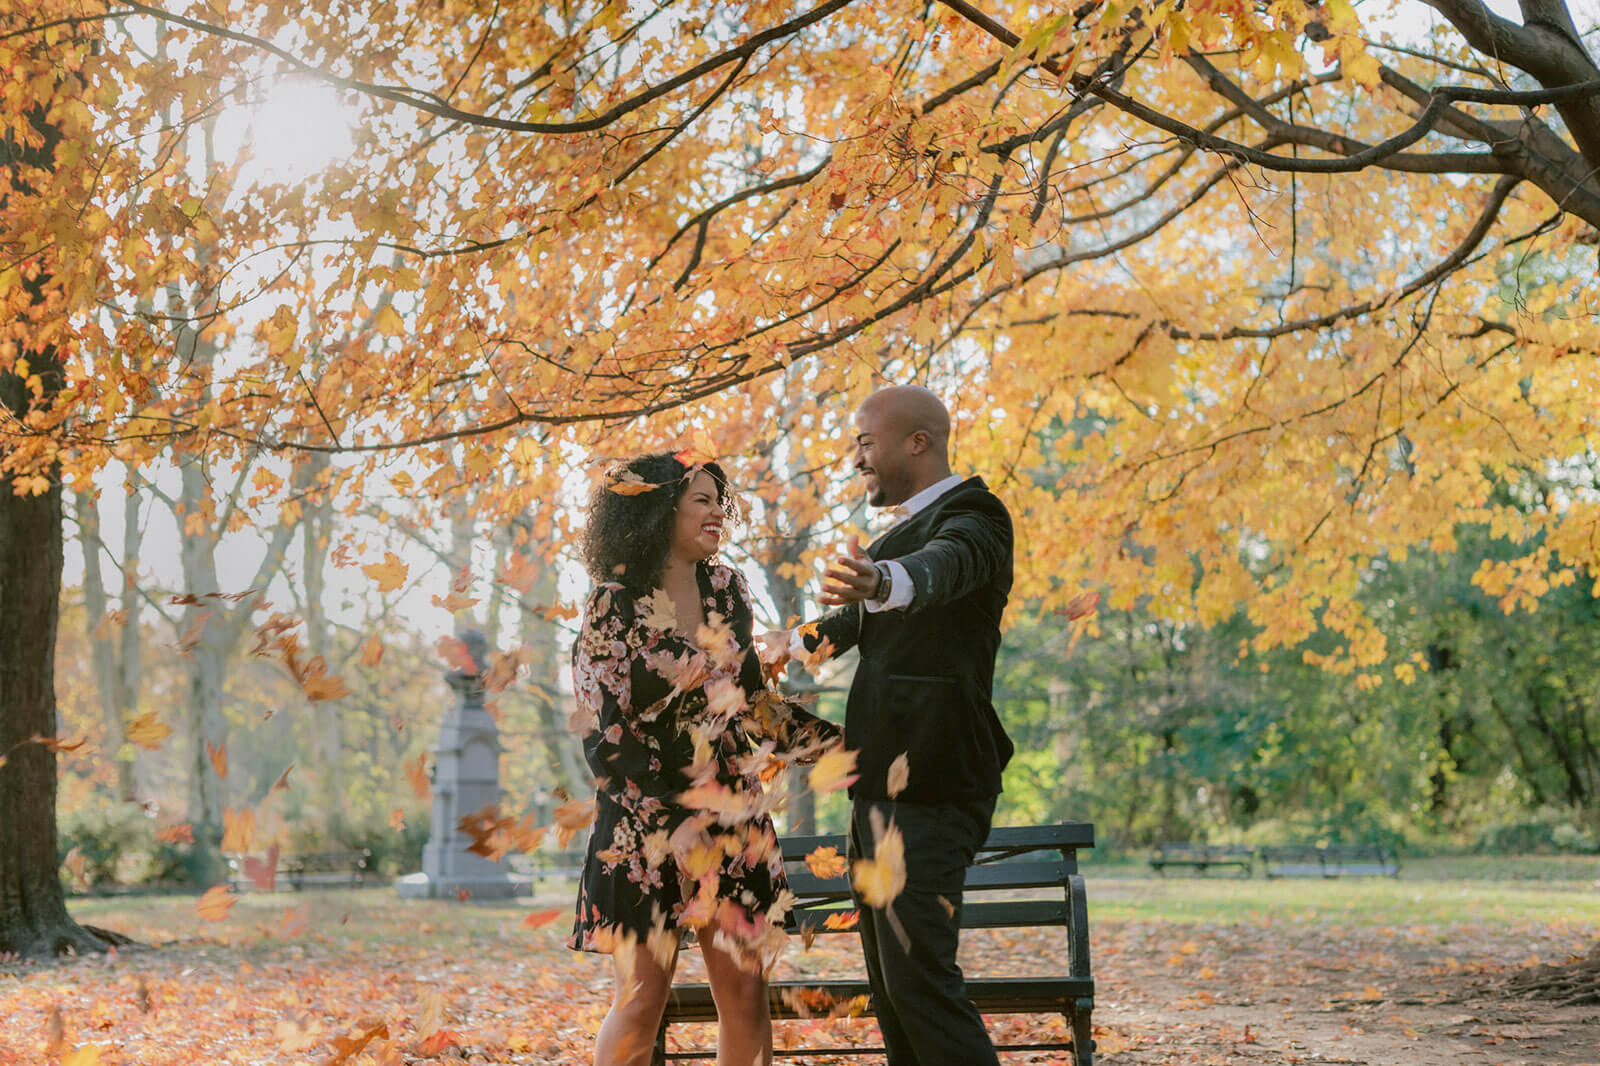 The engaged couple is laughing together under a tree in a park in Brooklyn. NYC Christmas Engagement Photos by Jenny Fu Studio  